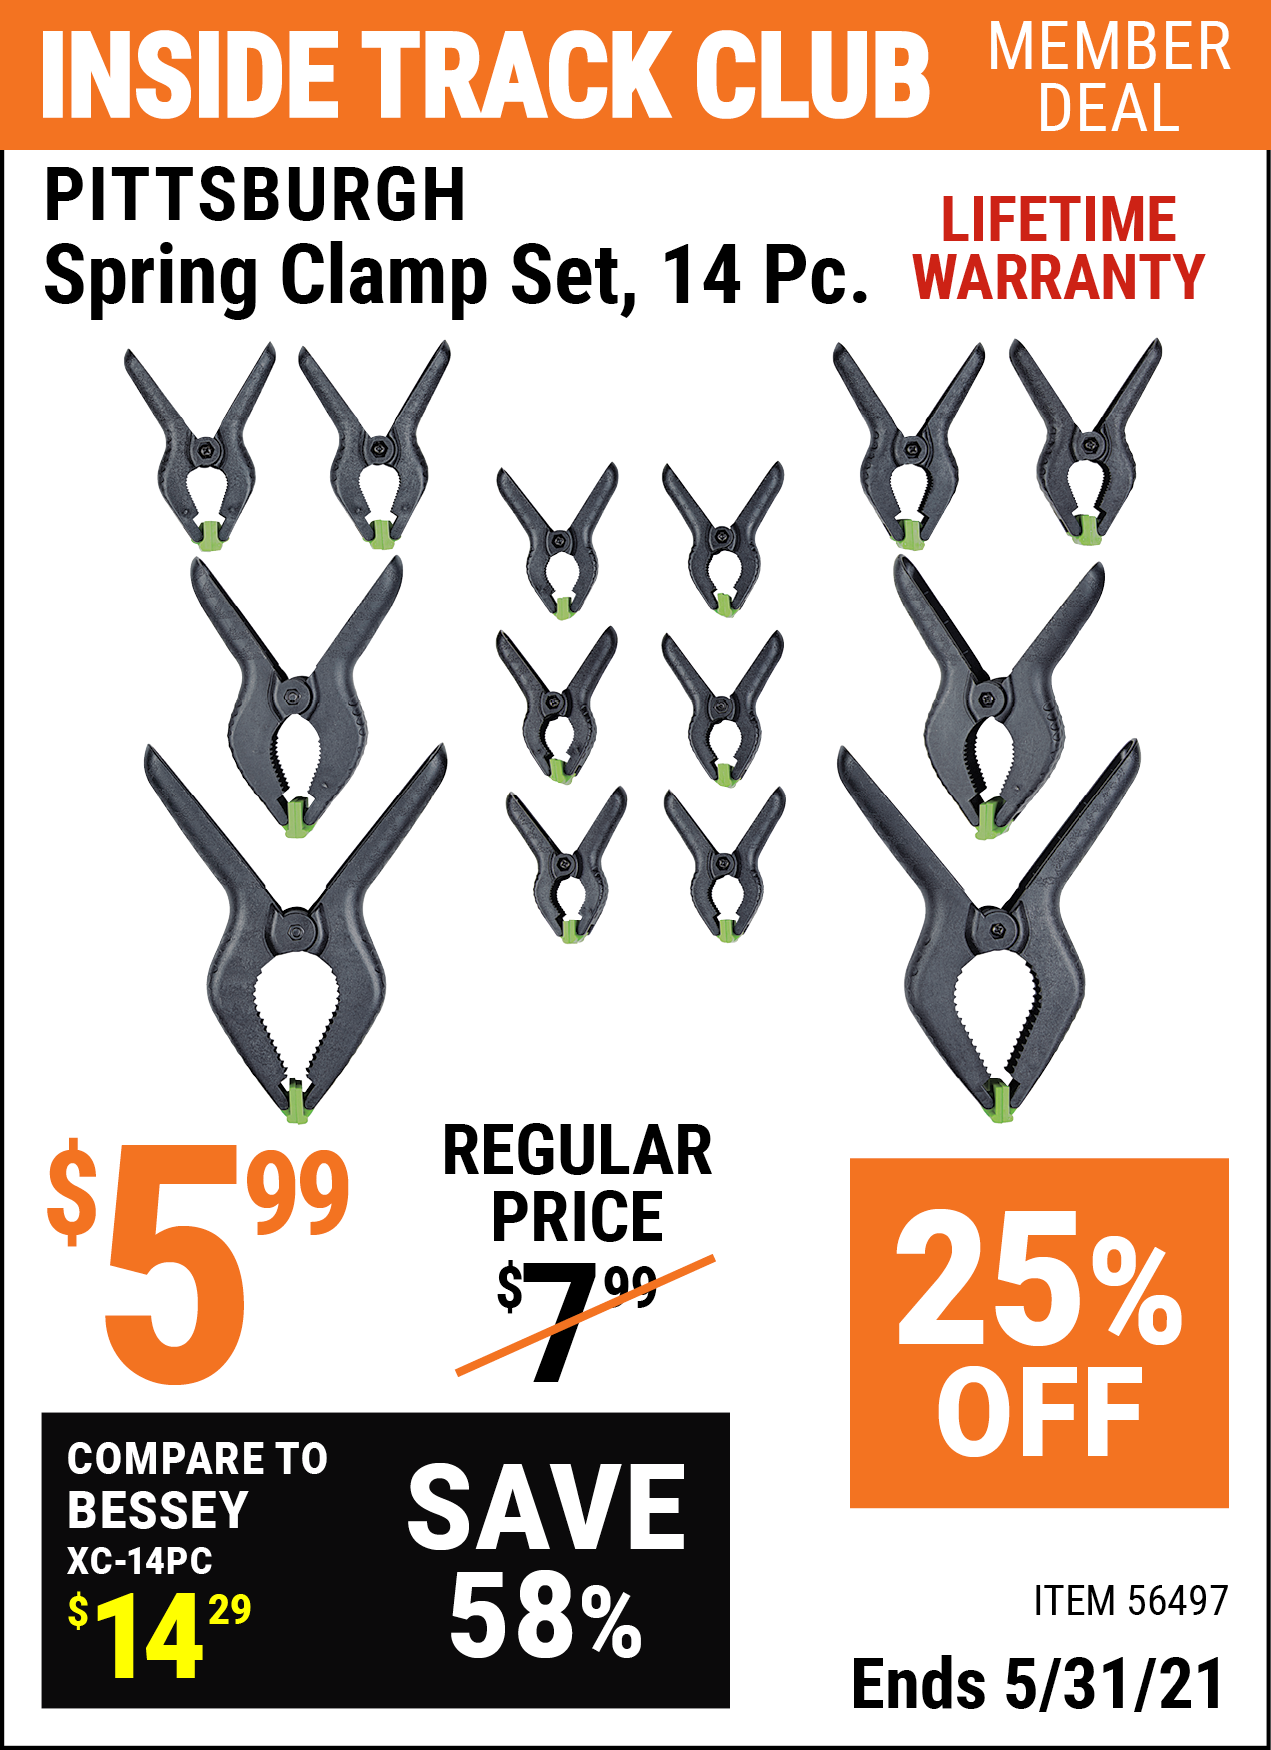 Inside Track Club members can buy the PITTSBURGH Spring Clamp Set 14 Pc. (Item 56497) for $5.99, valid through 5/31/2021.